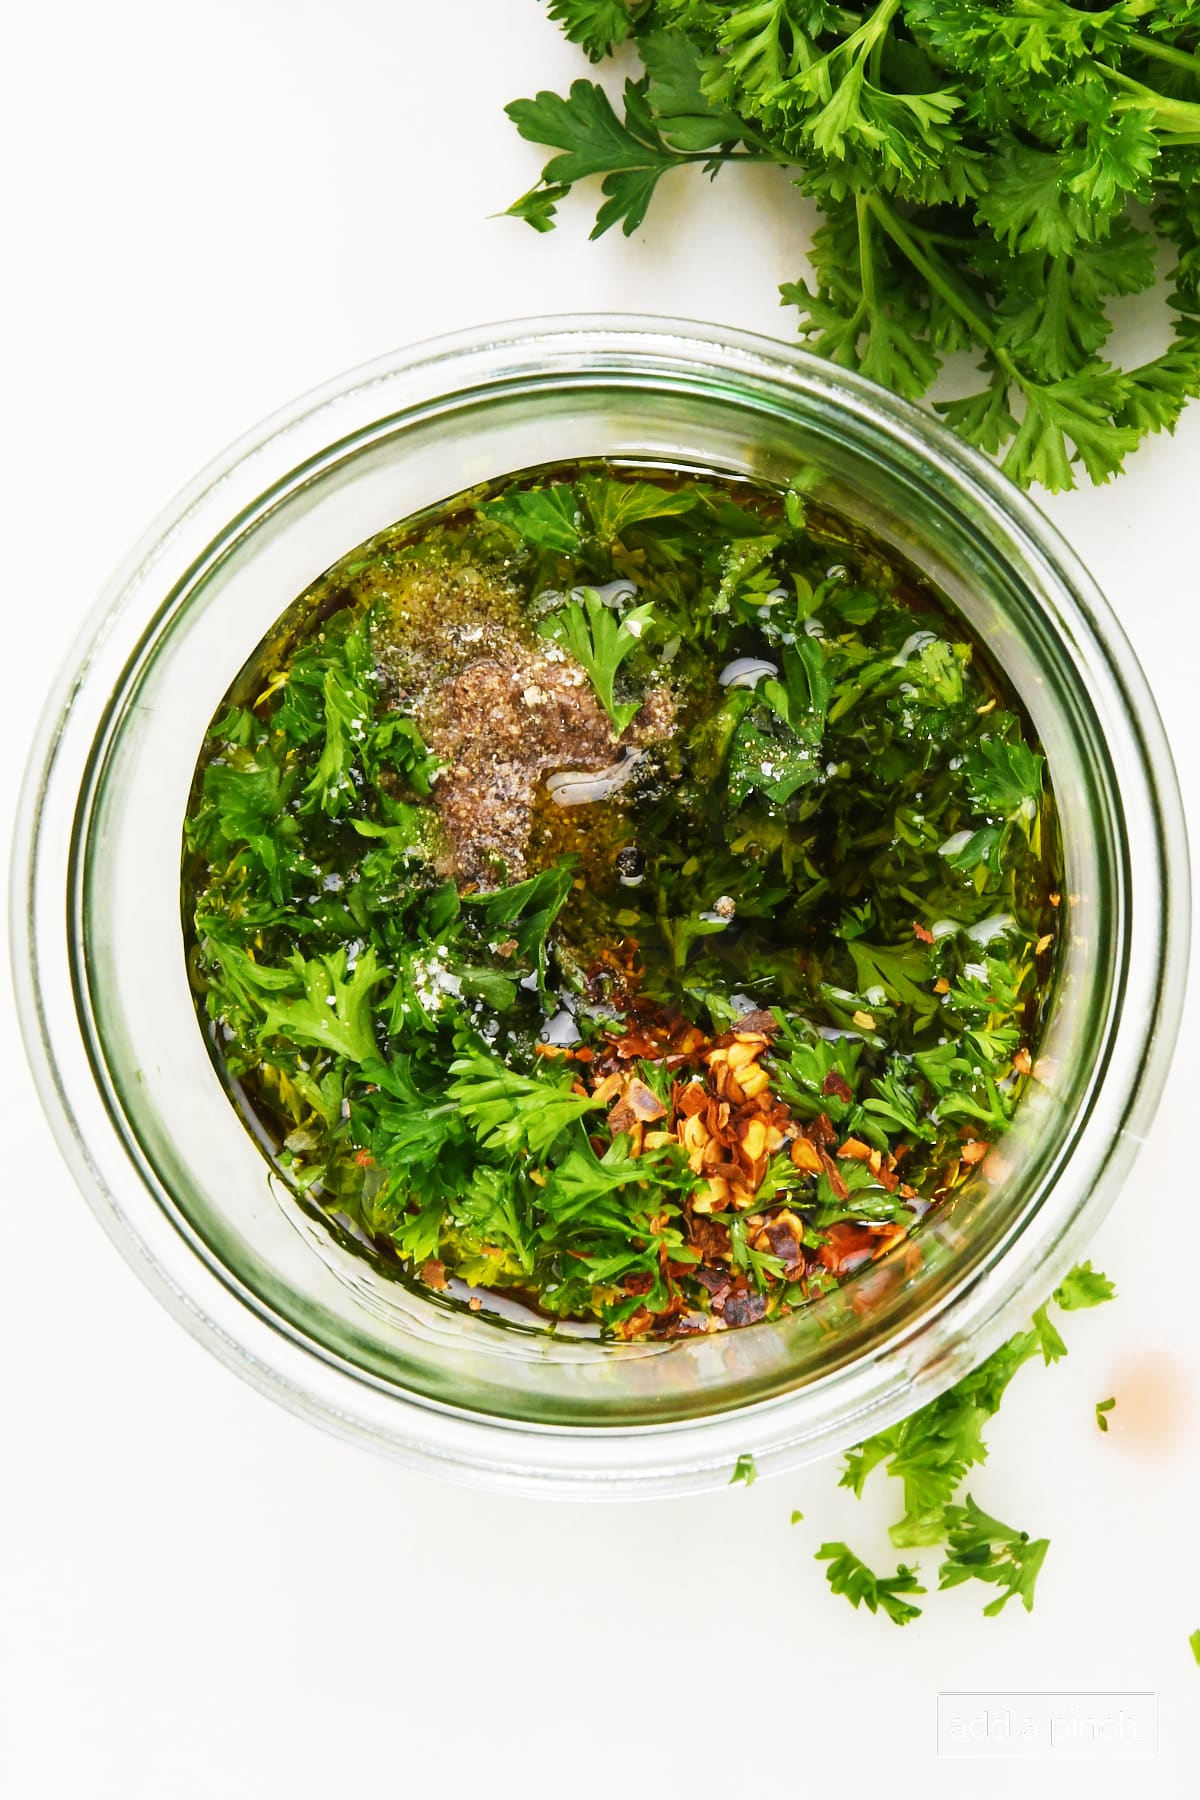 Resting chimichurri sauce recipe in a glass container.